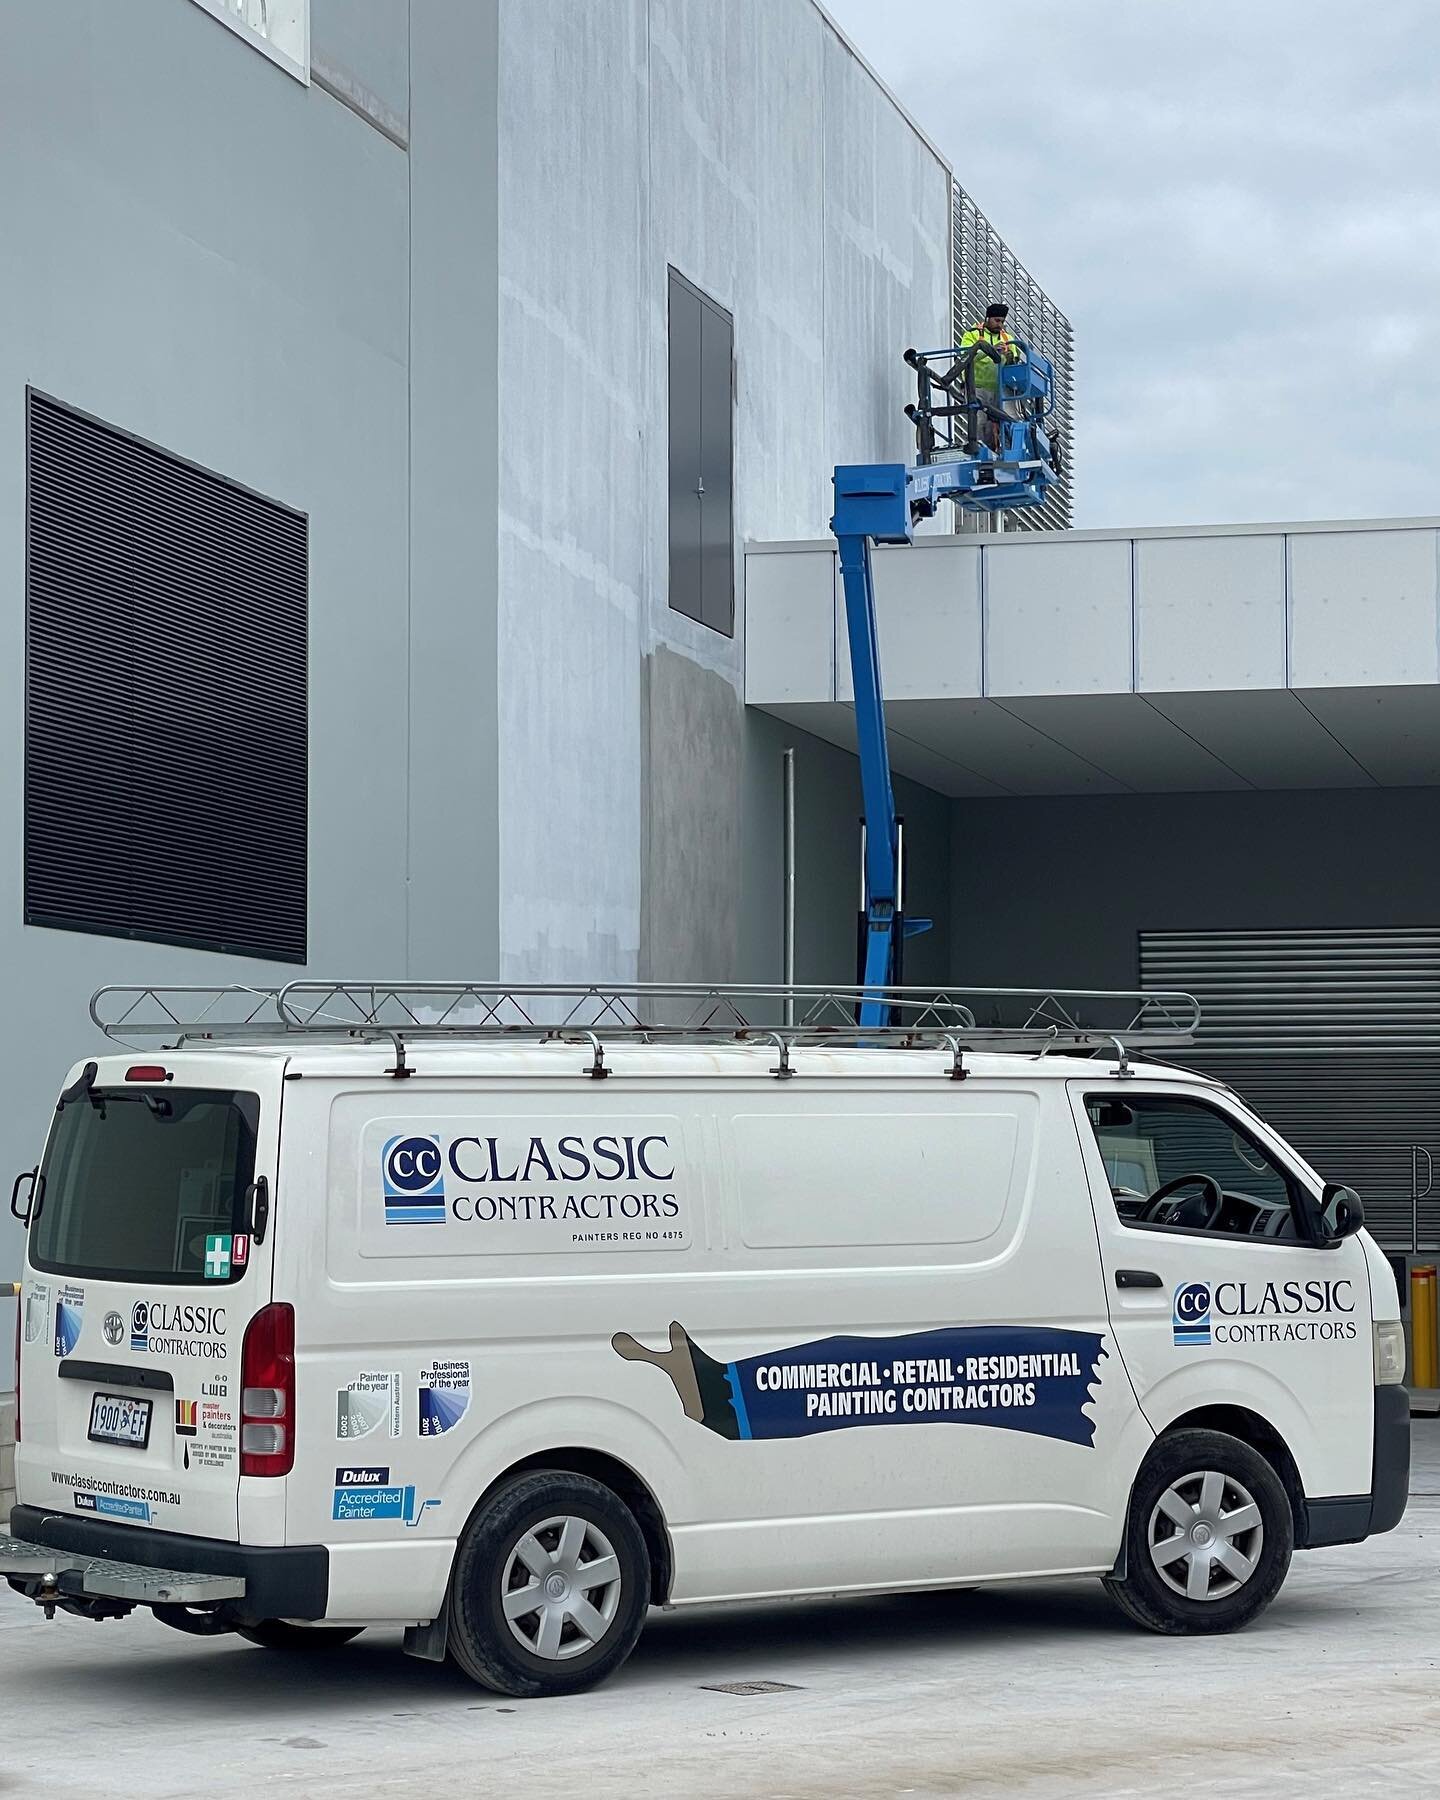 Equipped with the right tools to get the job done right, on budget and on time ✅
.
.
.
#classiccontractors #perthpainters #commercialpainters #residentialpainters #stratapainters #awardwinningpainters #duluxaccreditedpainters